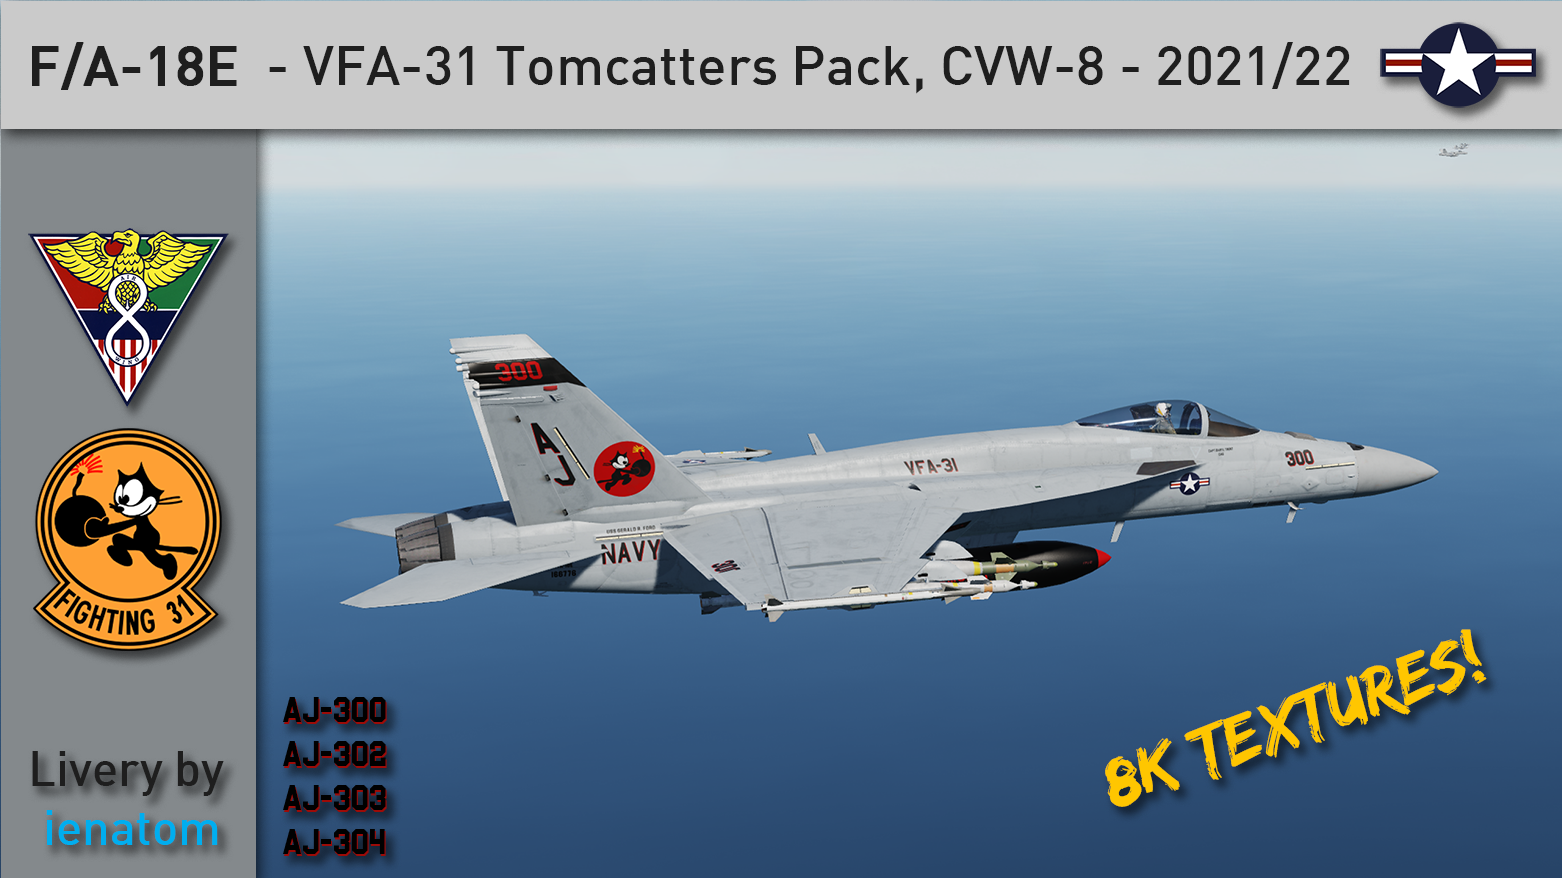 [F/A-18E] Tomcatters Pack - VFA-31, CVW-8, US Navy - 2021/2022